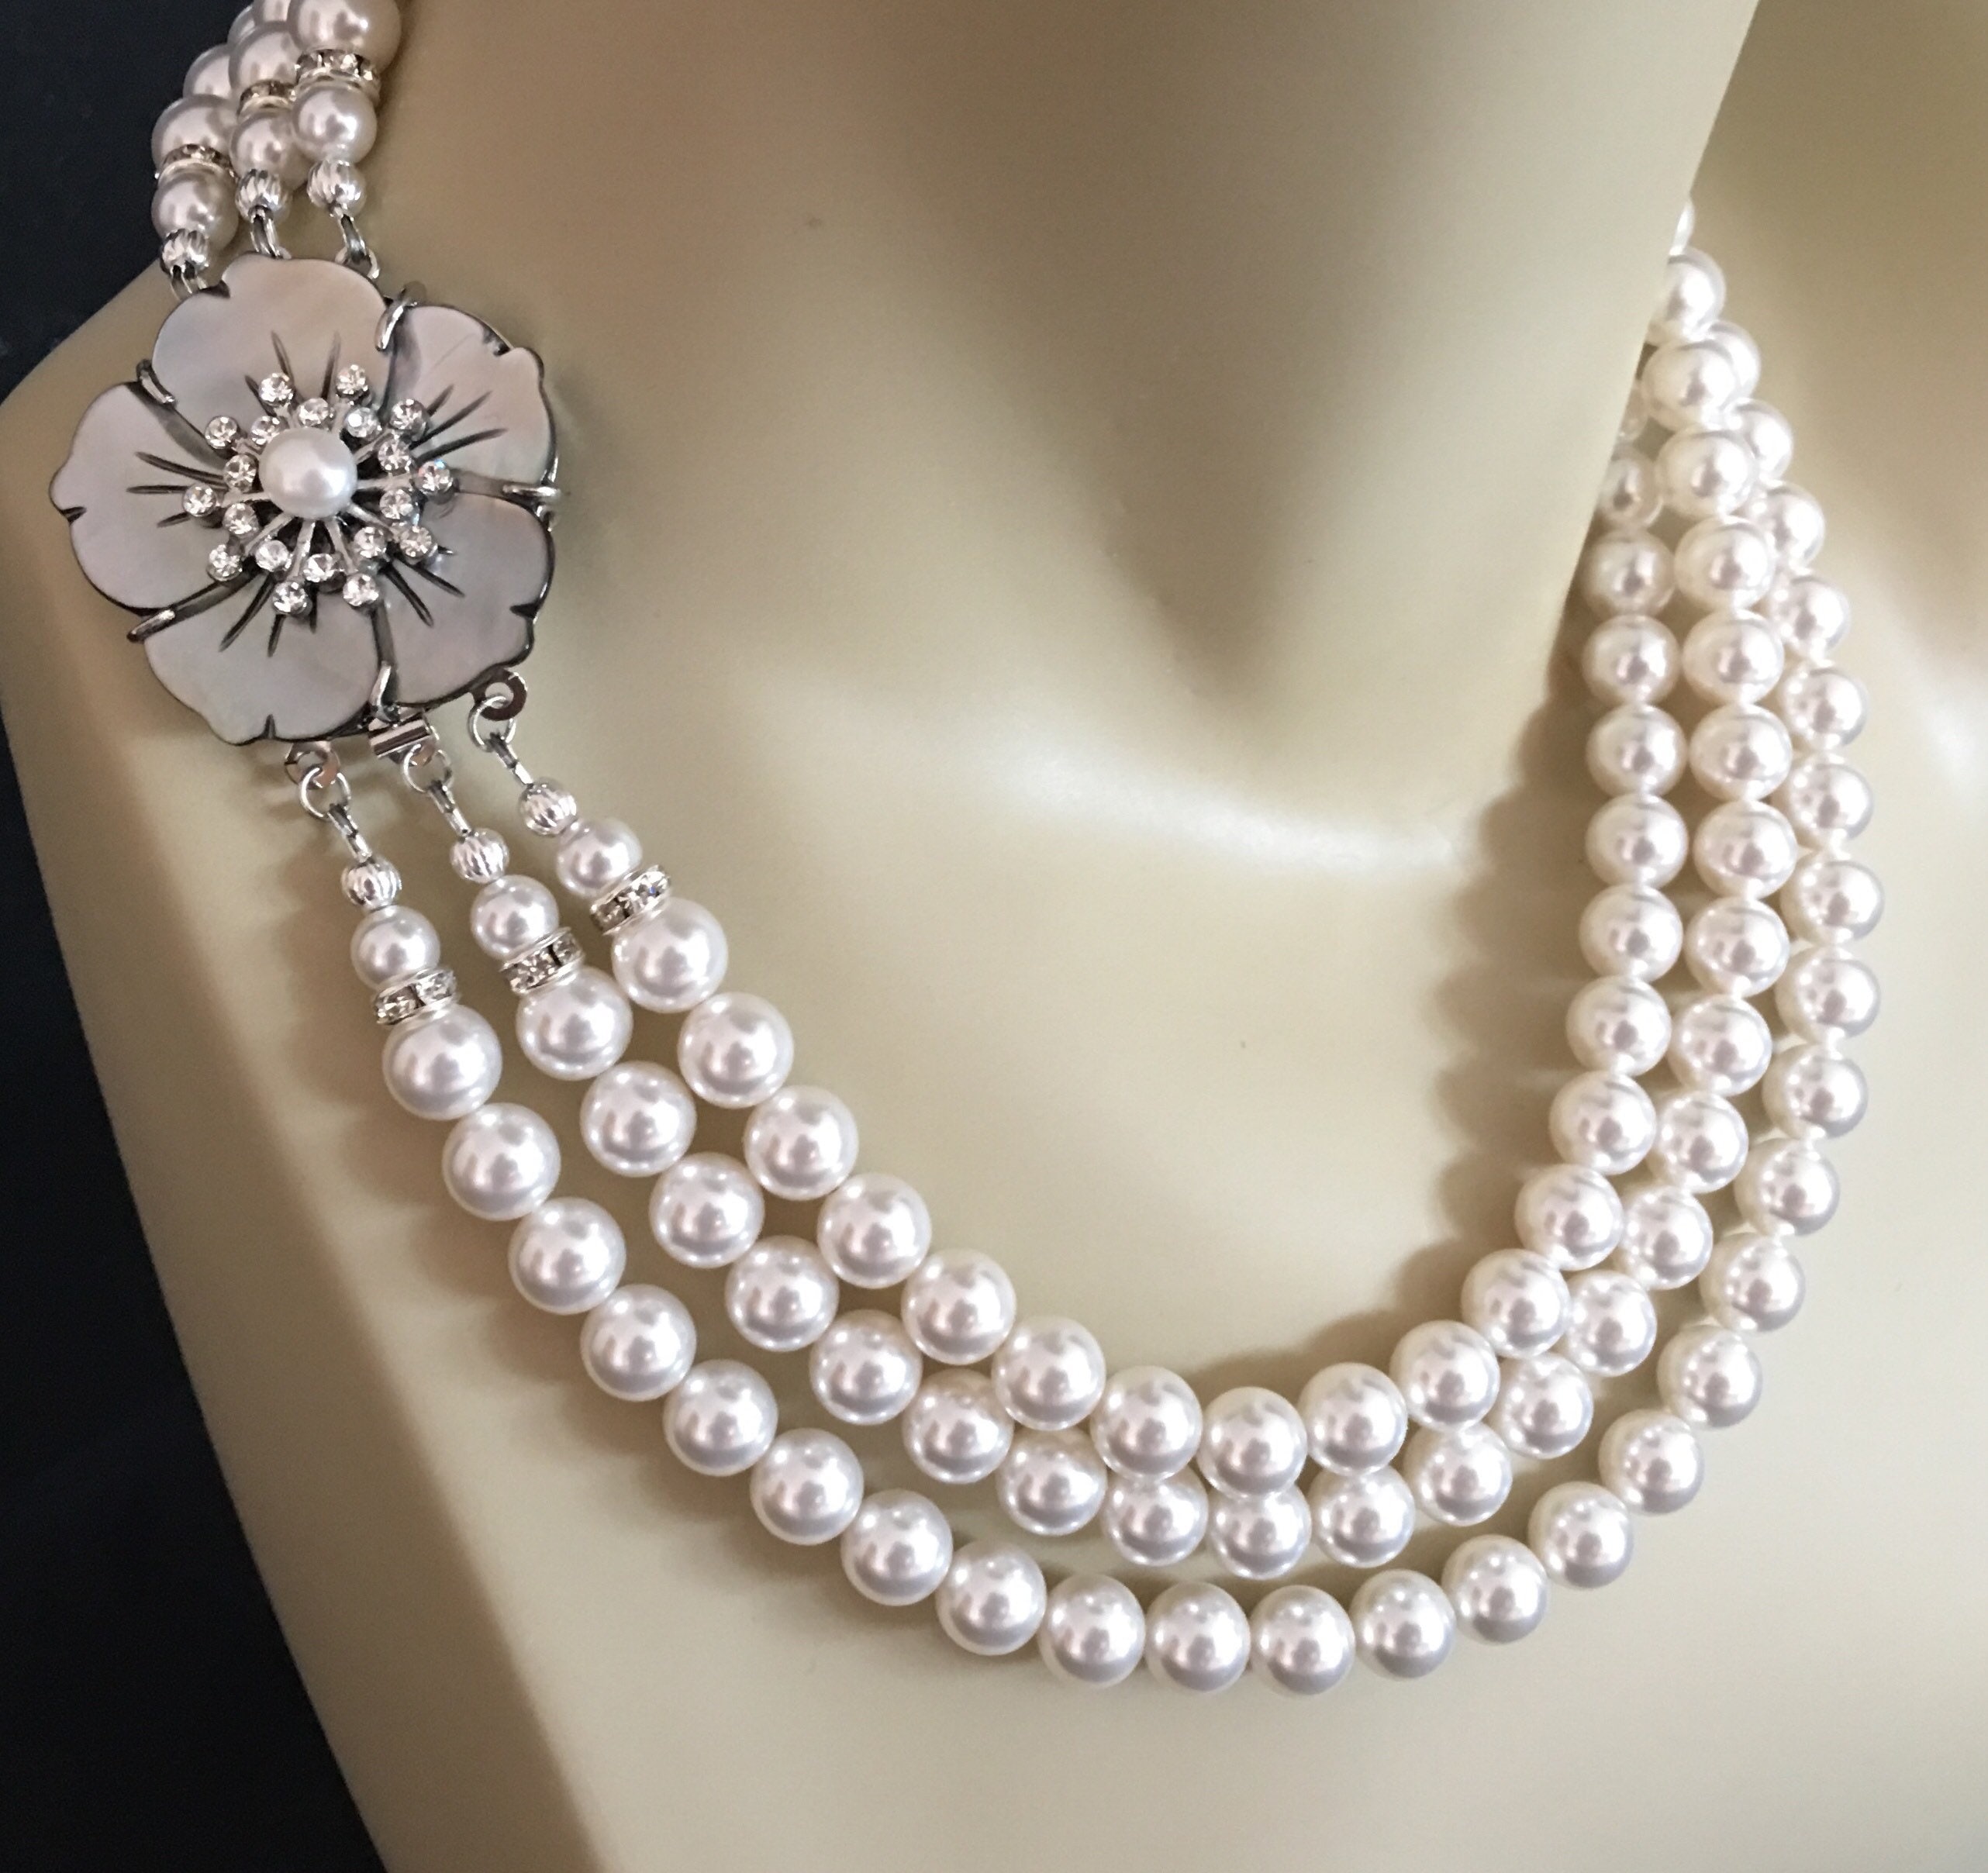 Classic Pearl Necklace, 10mm Dia, Faux Pearls